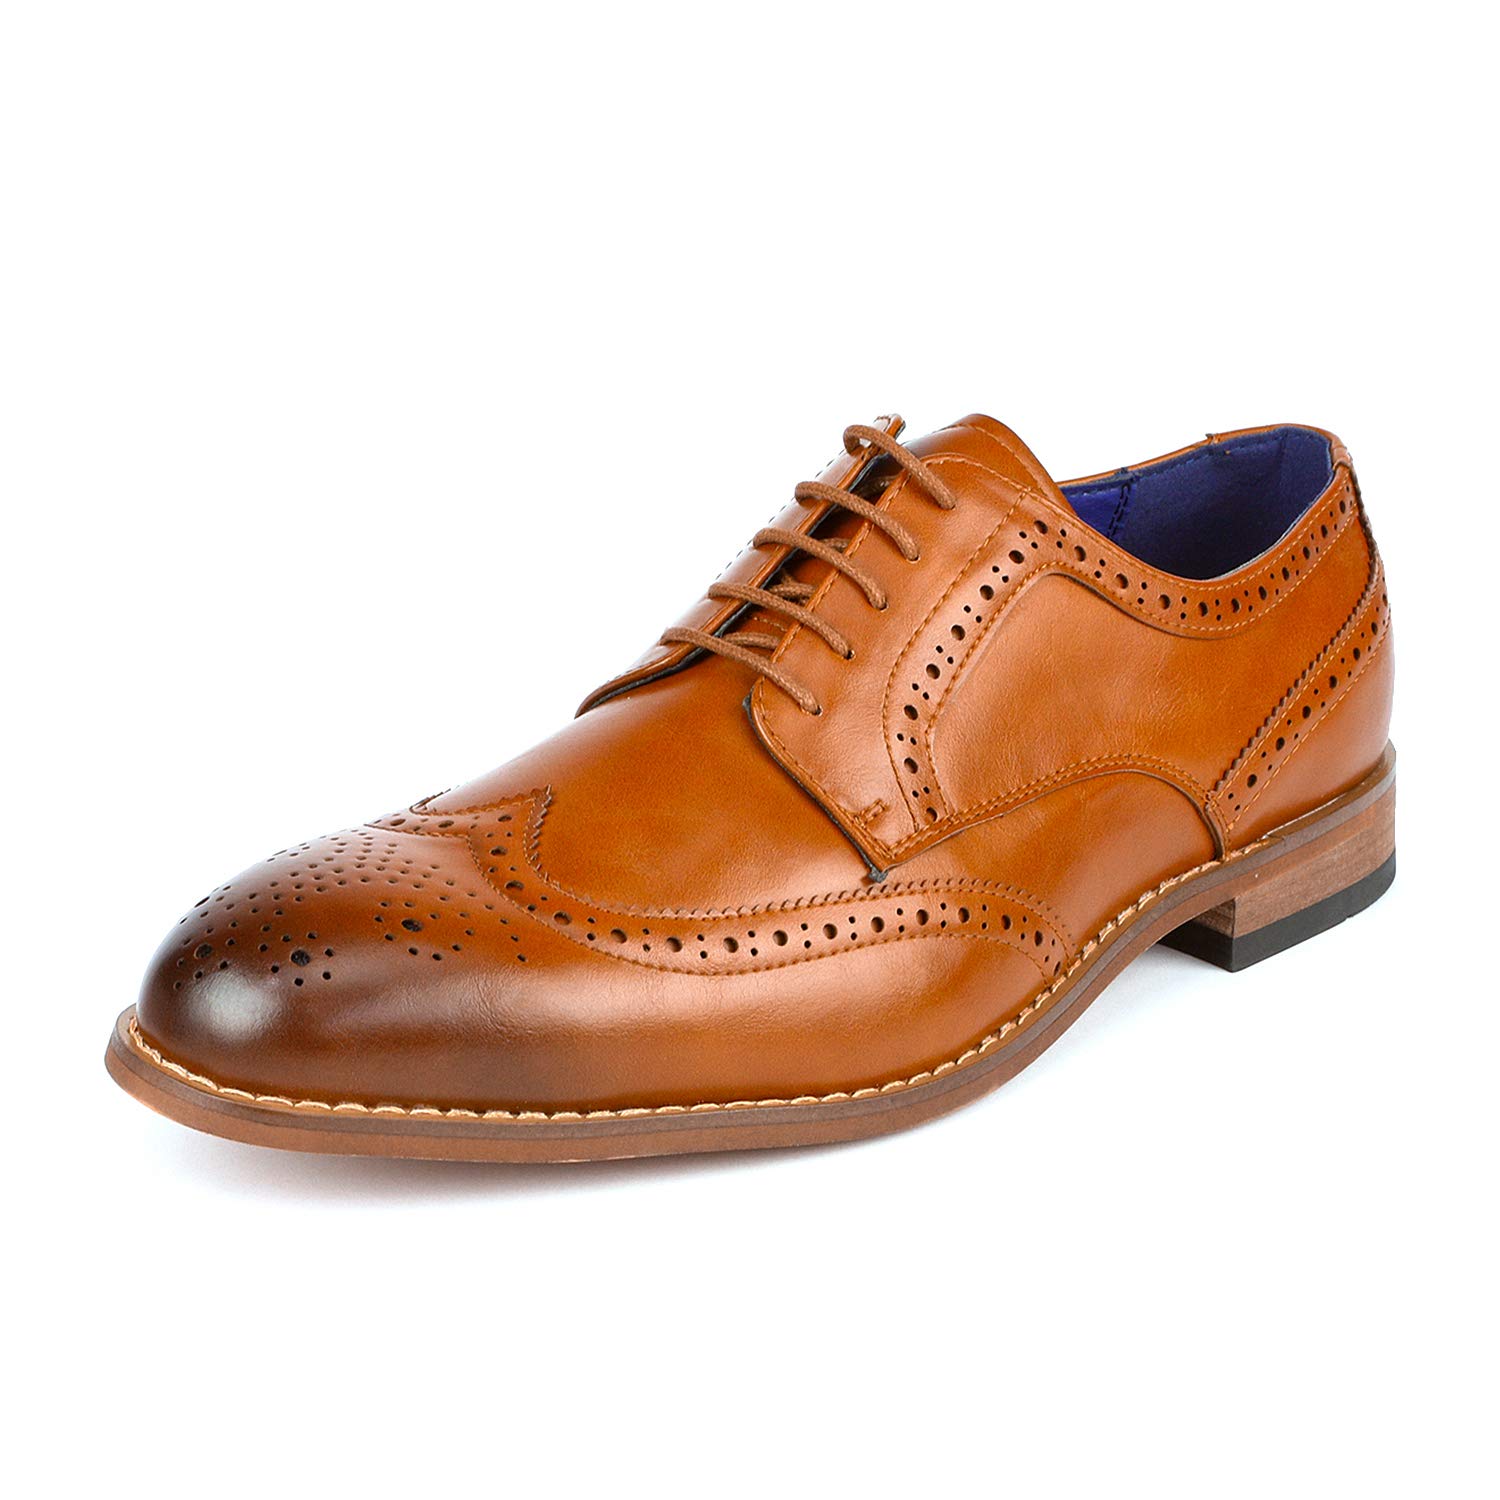 Bruno Marc Mens Brogue Oxford Shoes Lace up Wing Tip Dress Shoes Casual Shoes WILLIAM_2 CAMEL Size 9.5 - image 1 of 5